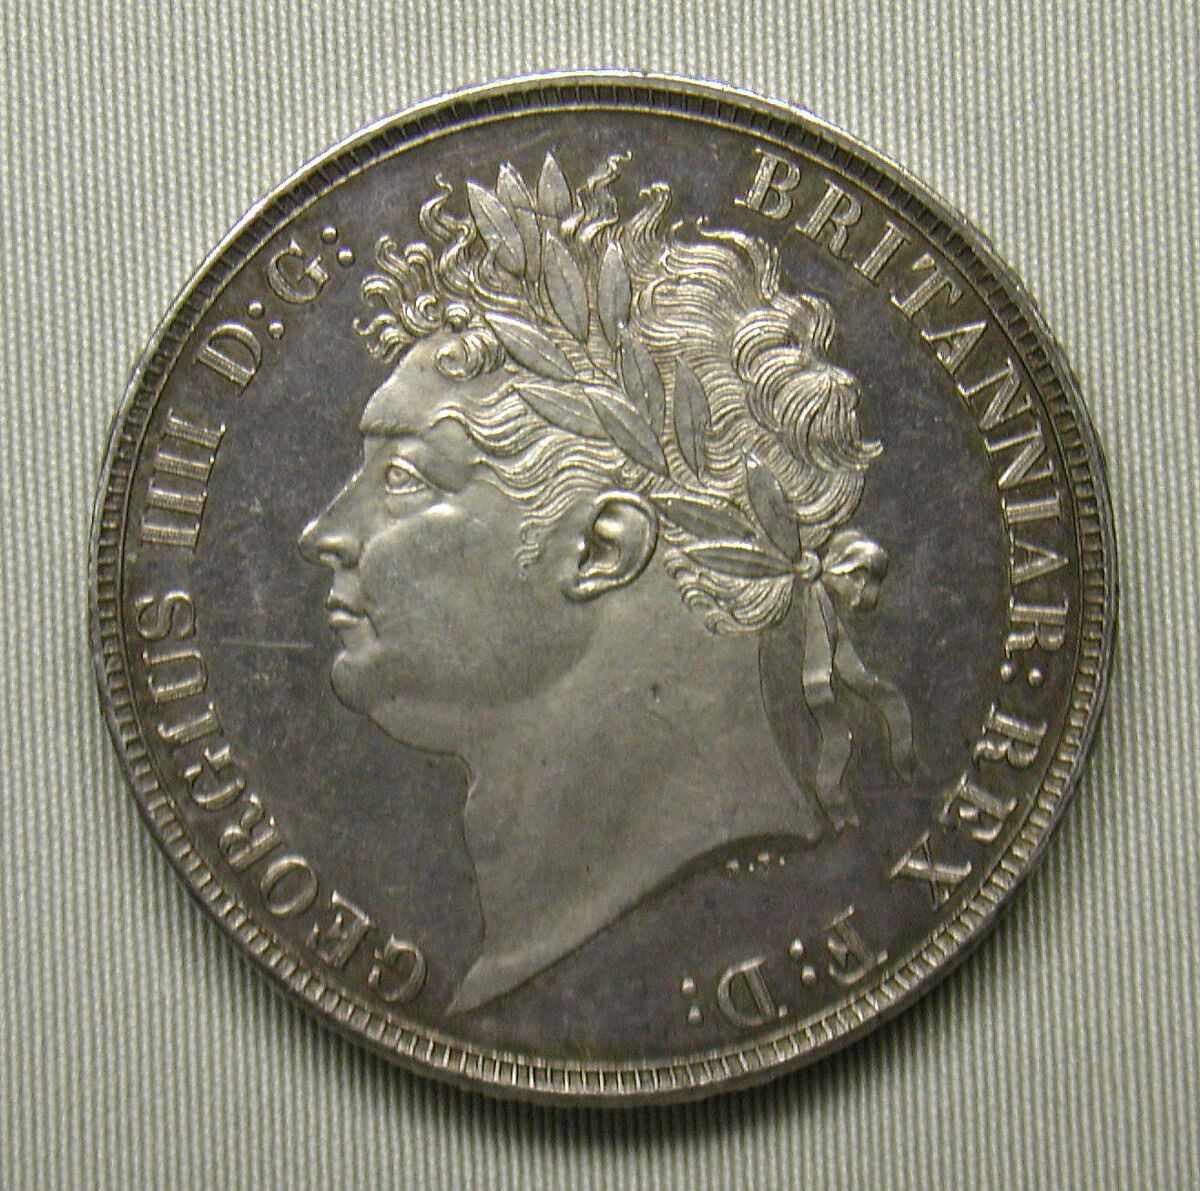 Proof crown of George IV, Medalist: Benedetto Pistrucci (Italian, 1783–1855, active England), Silver, British 